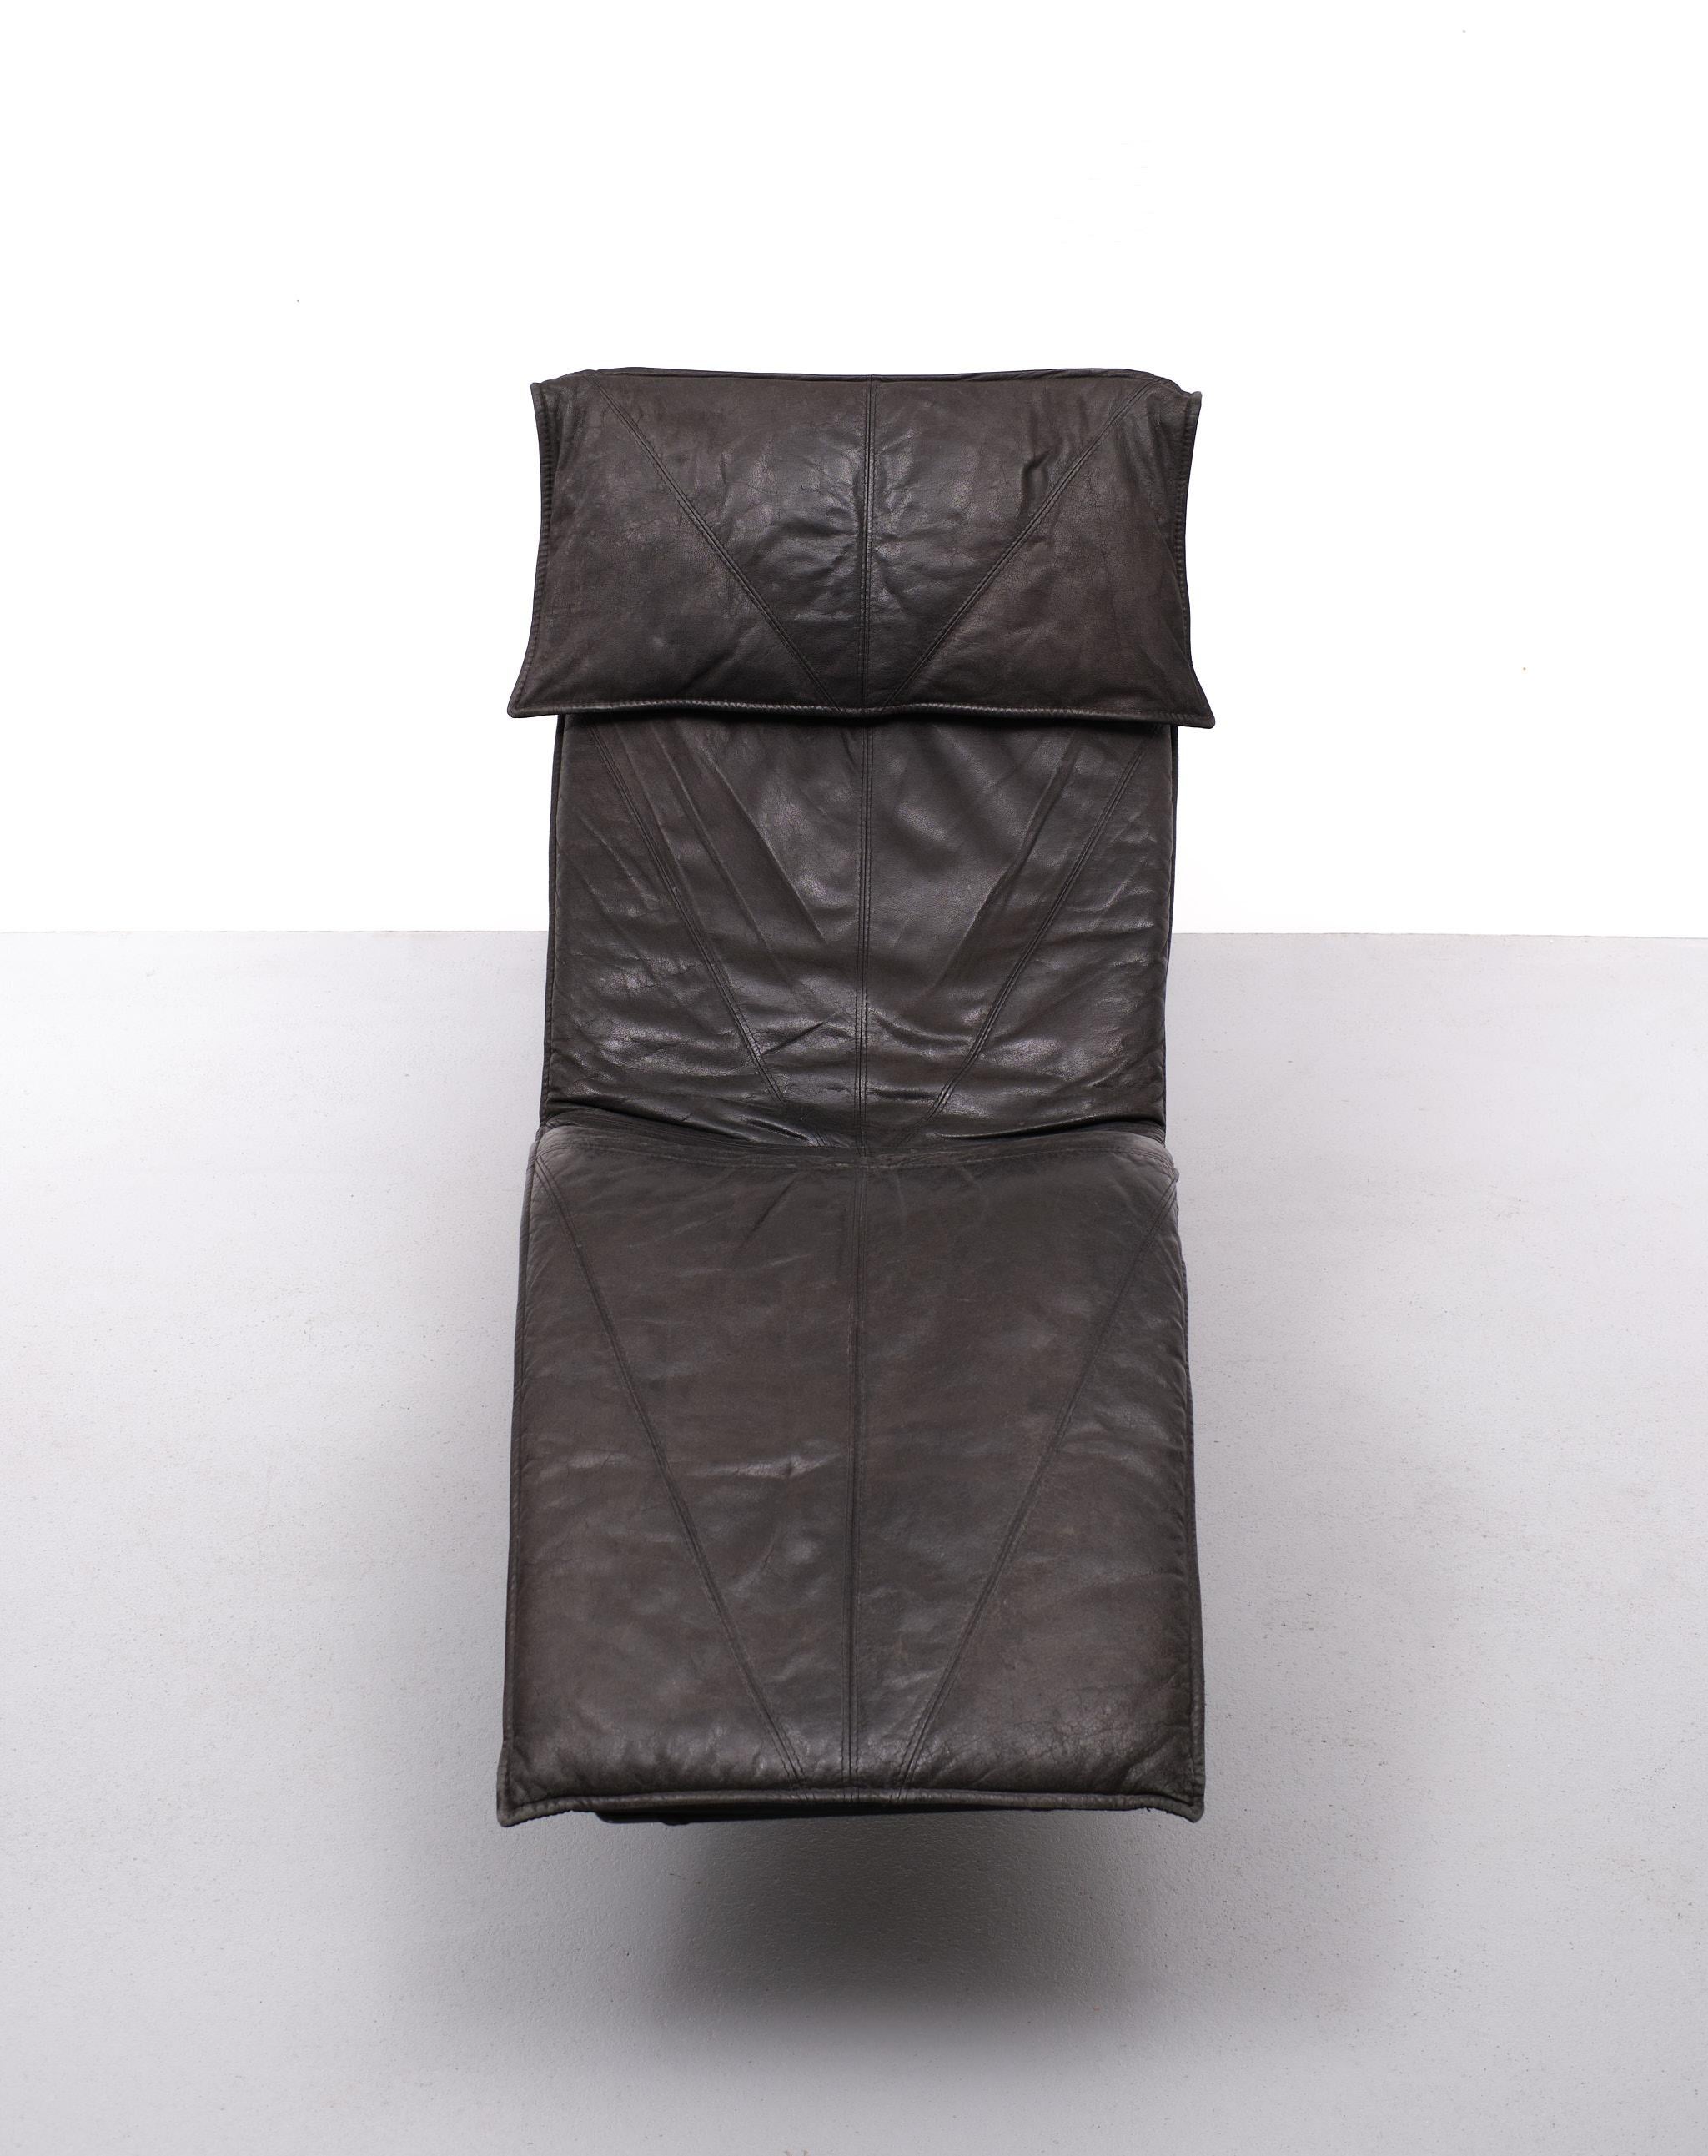 Modern  Leather Lounge Chair by Tord Björklund for Ikea, 1980s